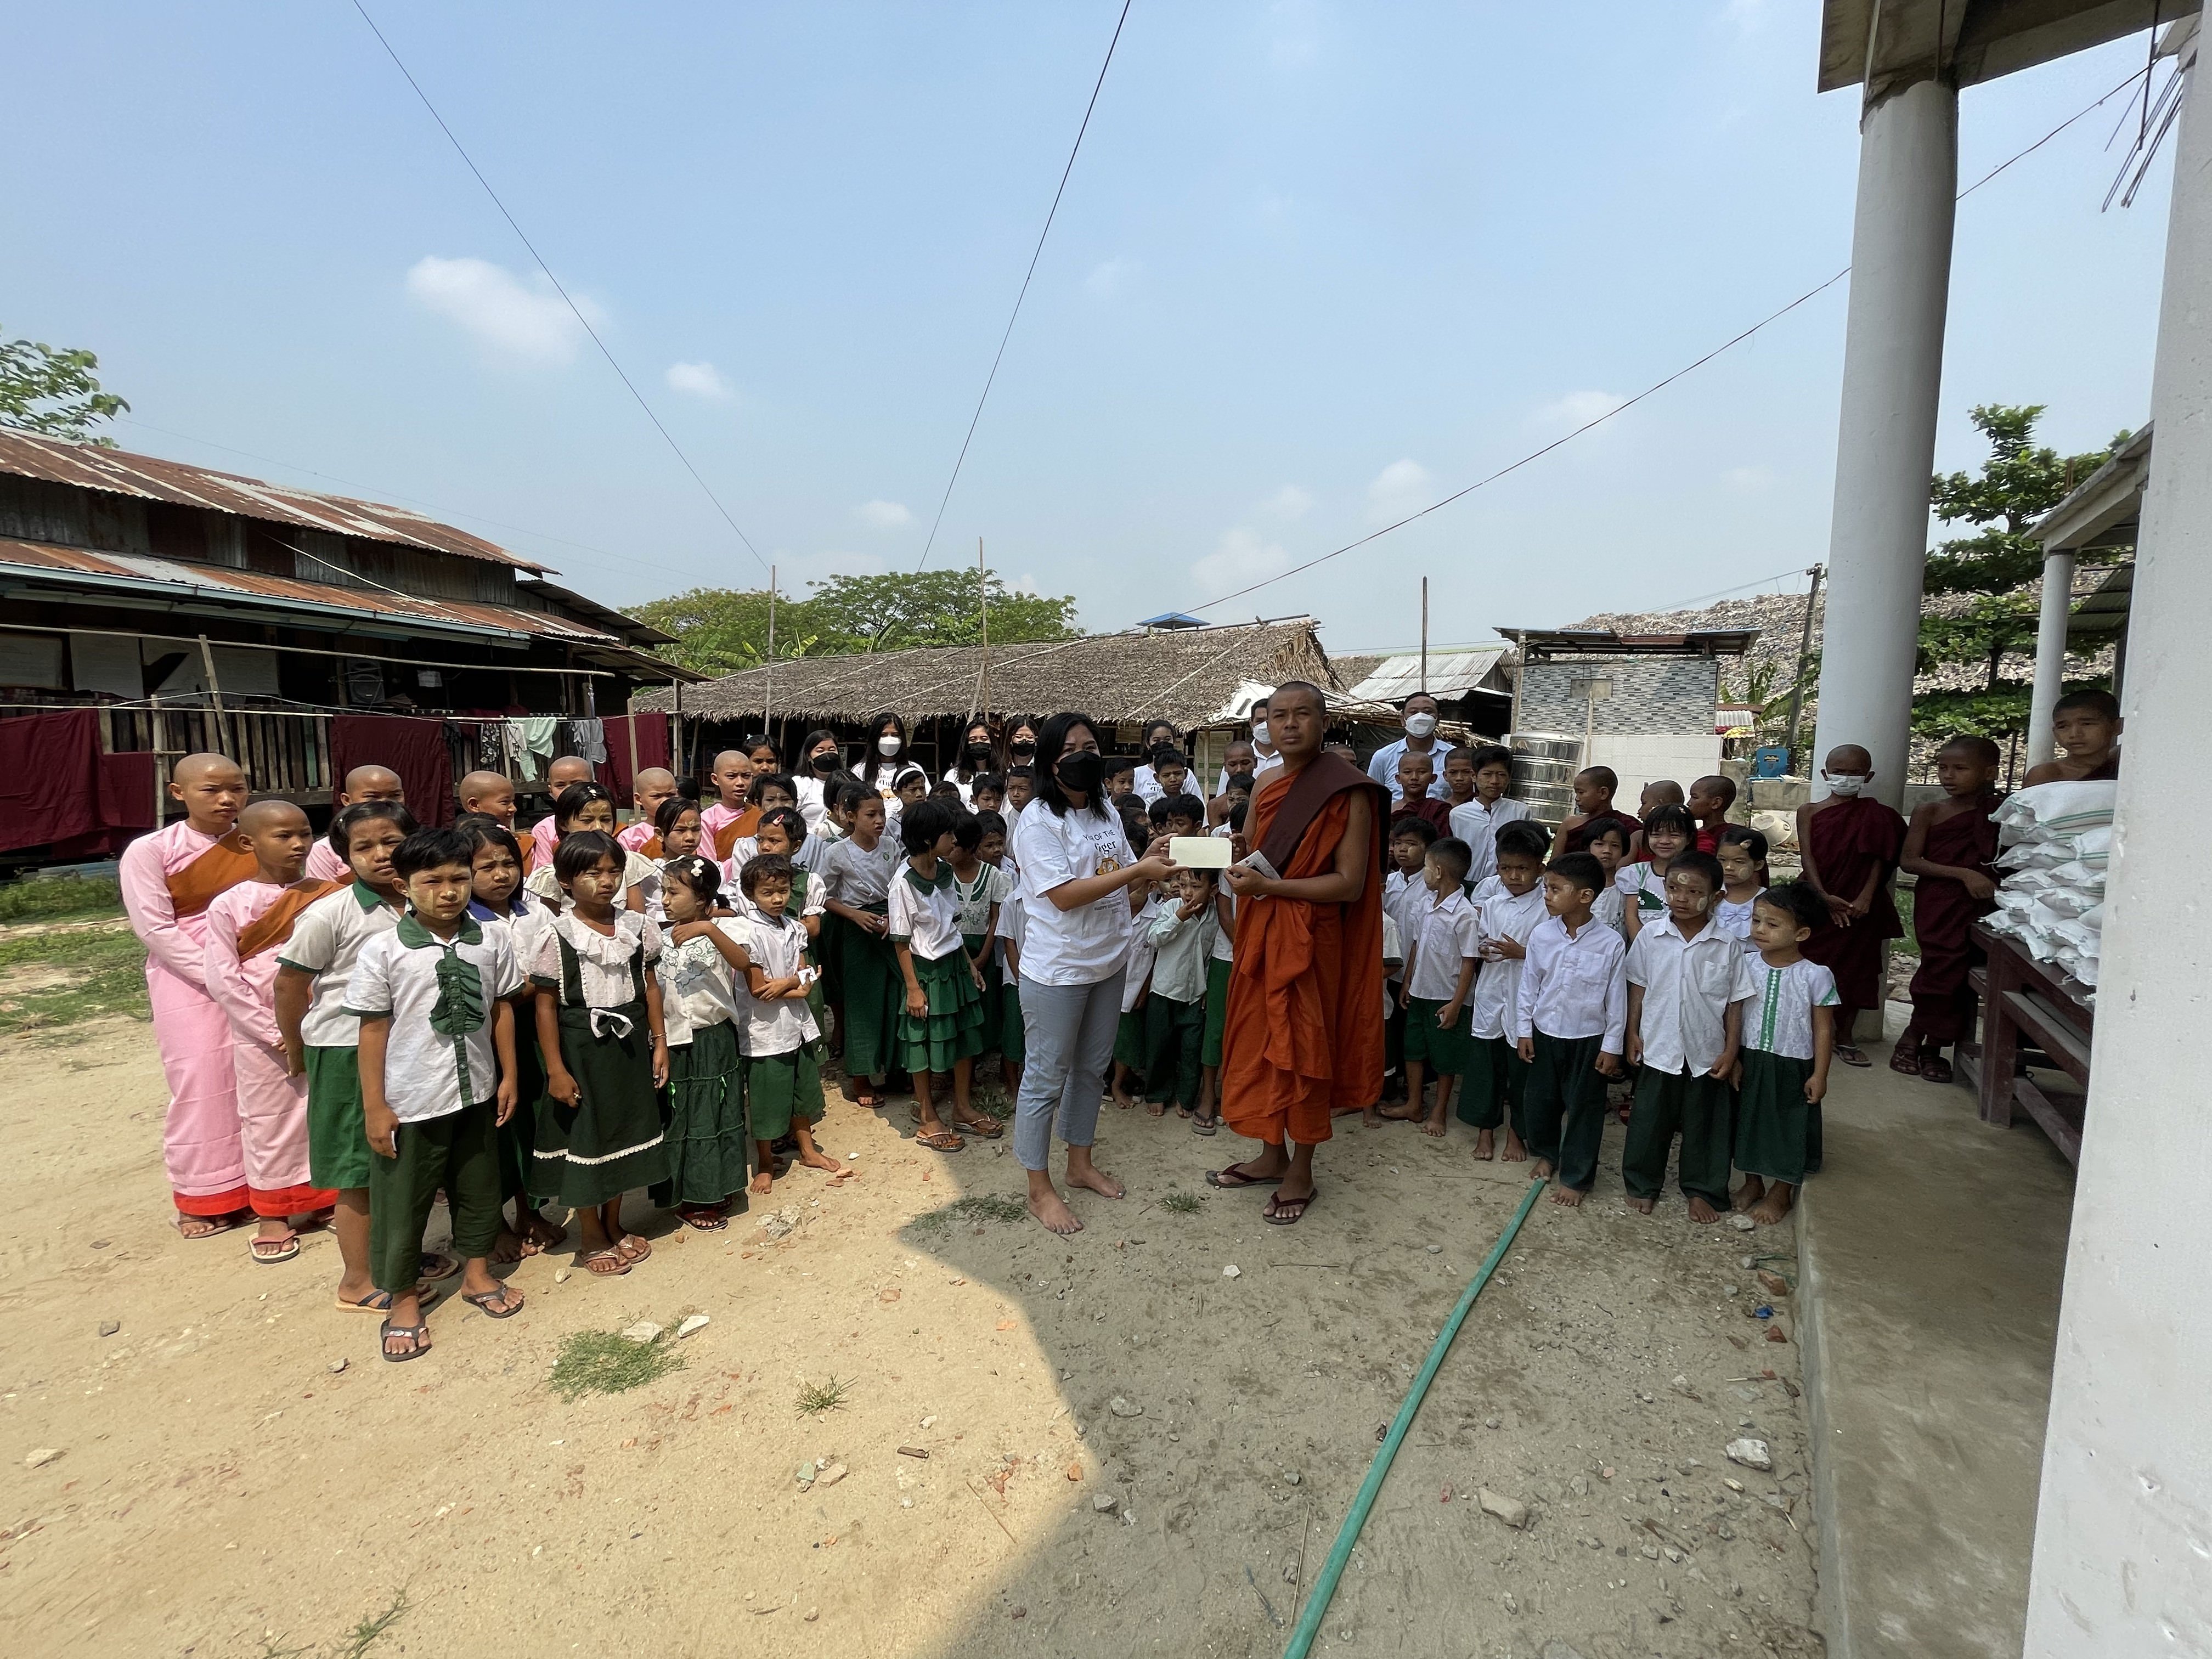 Myanmar Plaza Donated Food Supplies to Needy Families and Funds for Renovation of a Monastic School